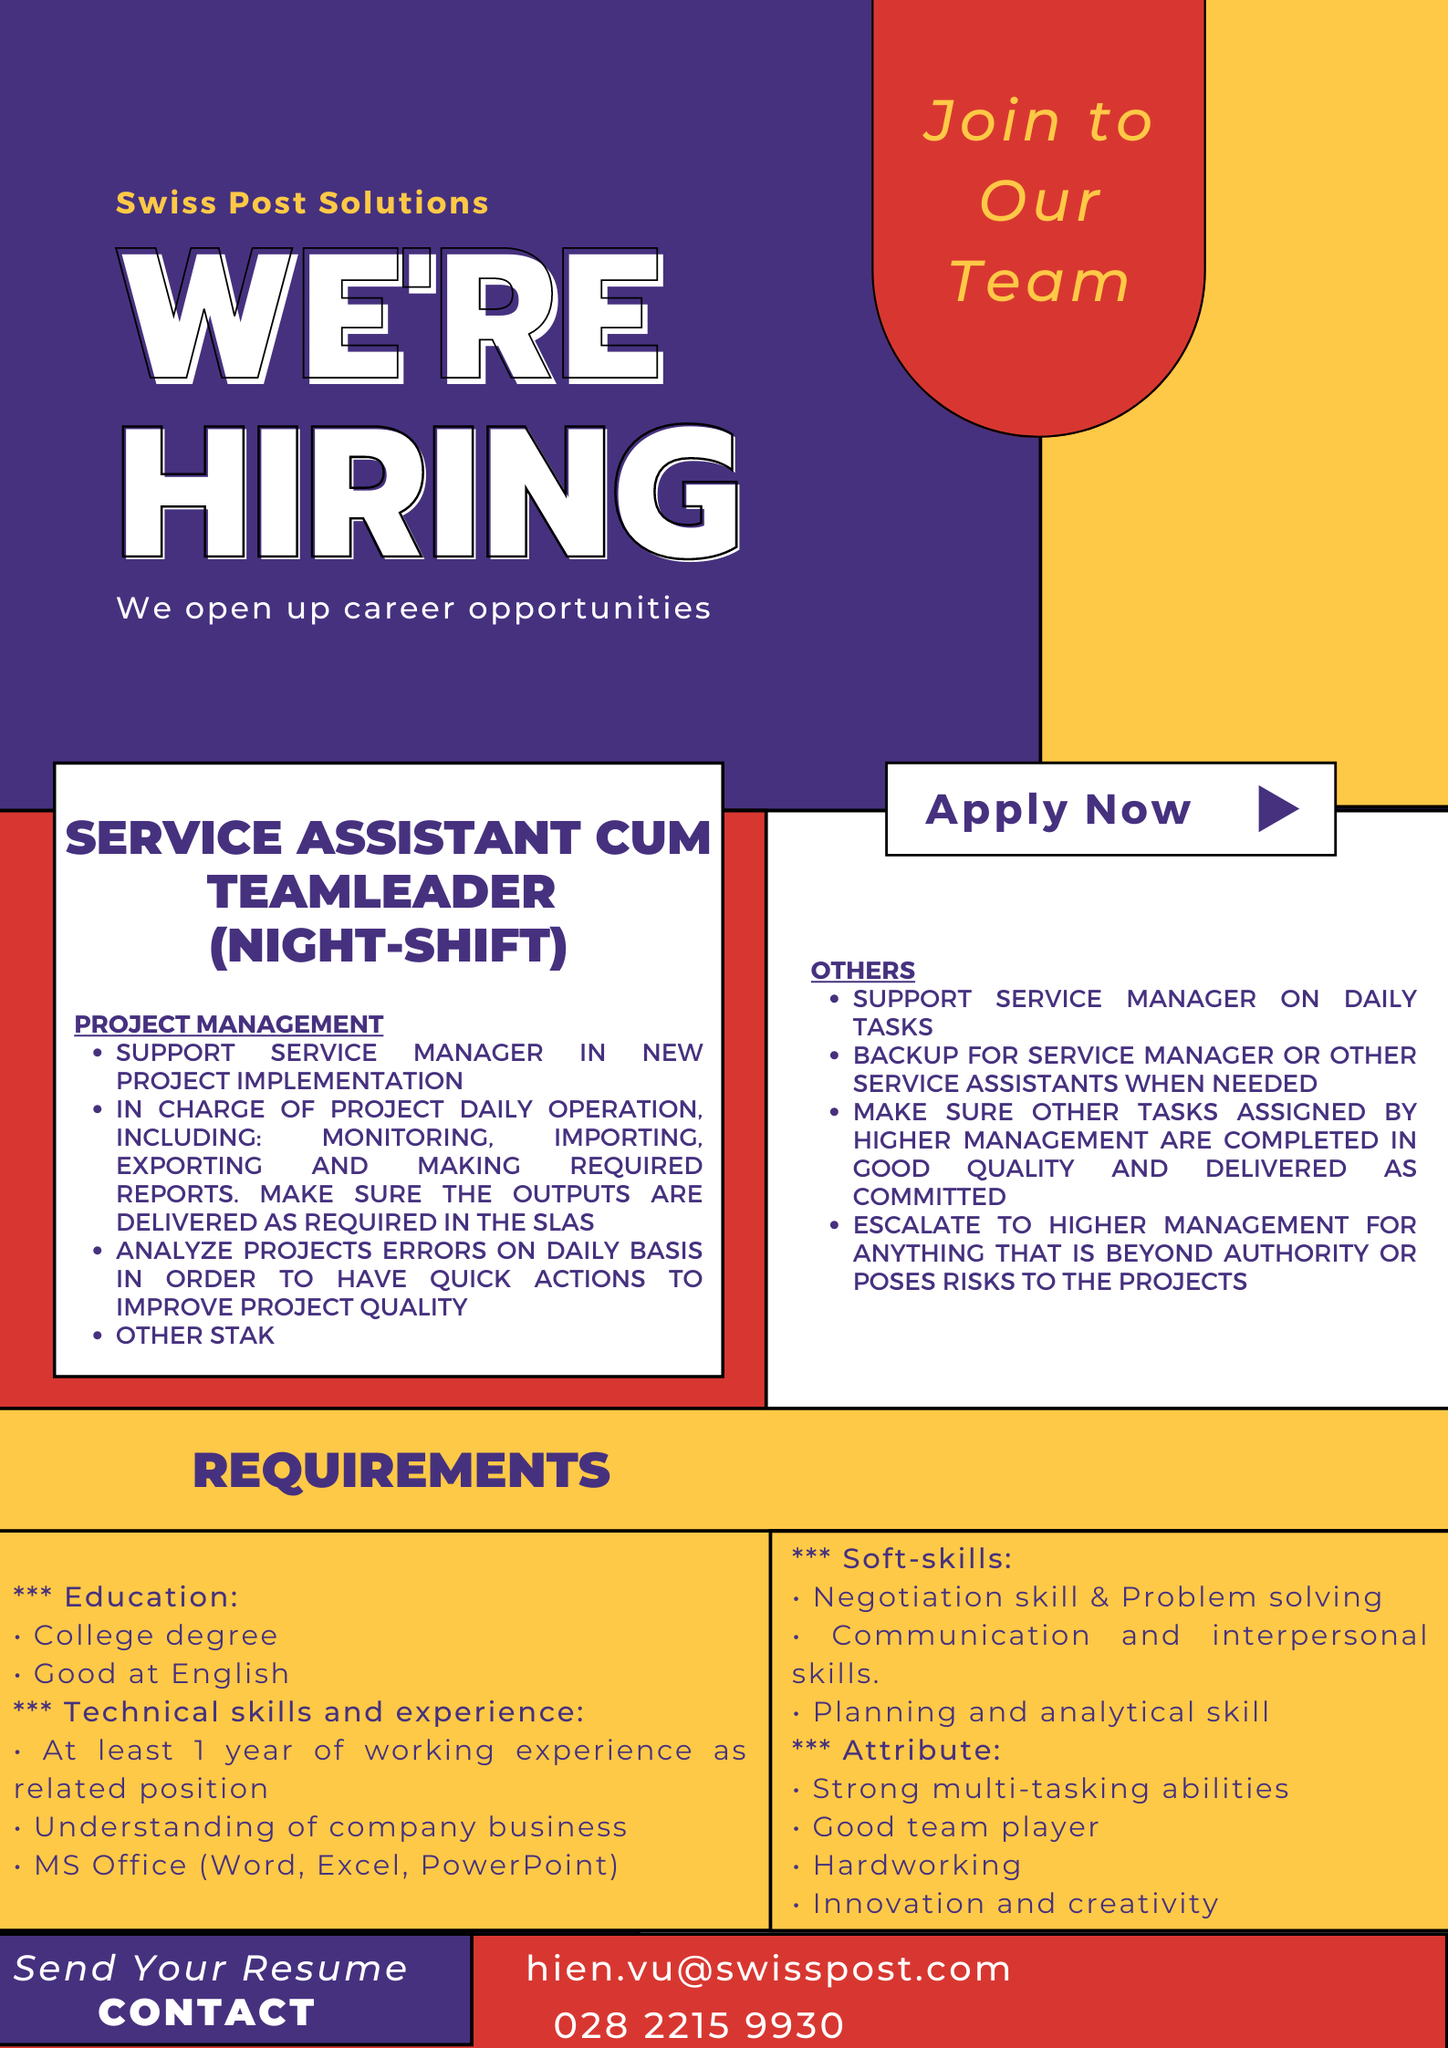 Swiss Post Solutions is hiring Service Assistant Cum Teamleader (Night-shift)